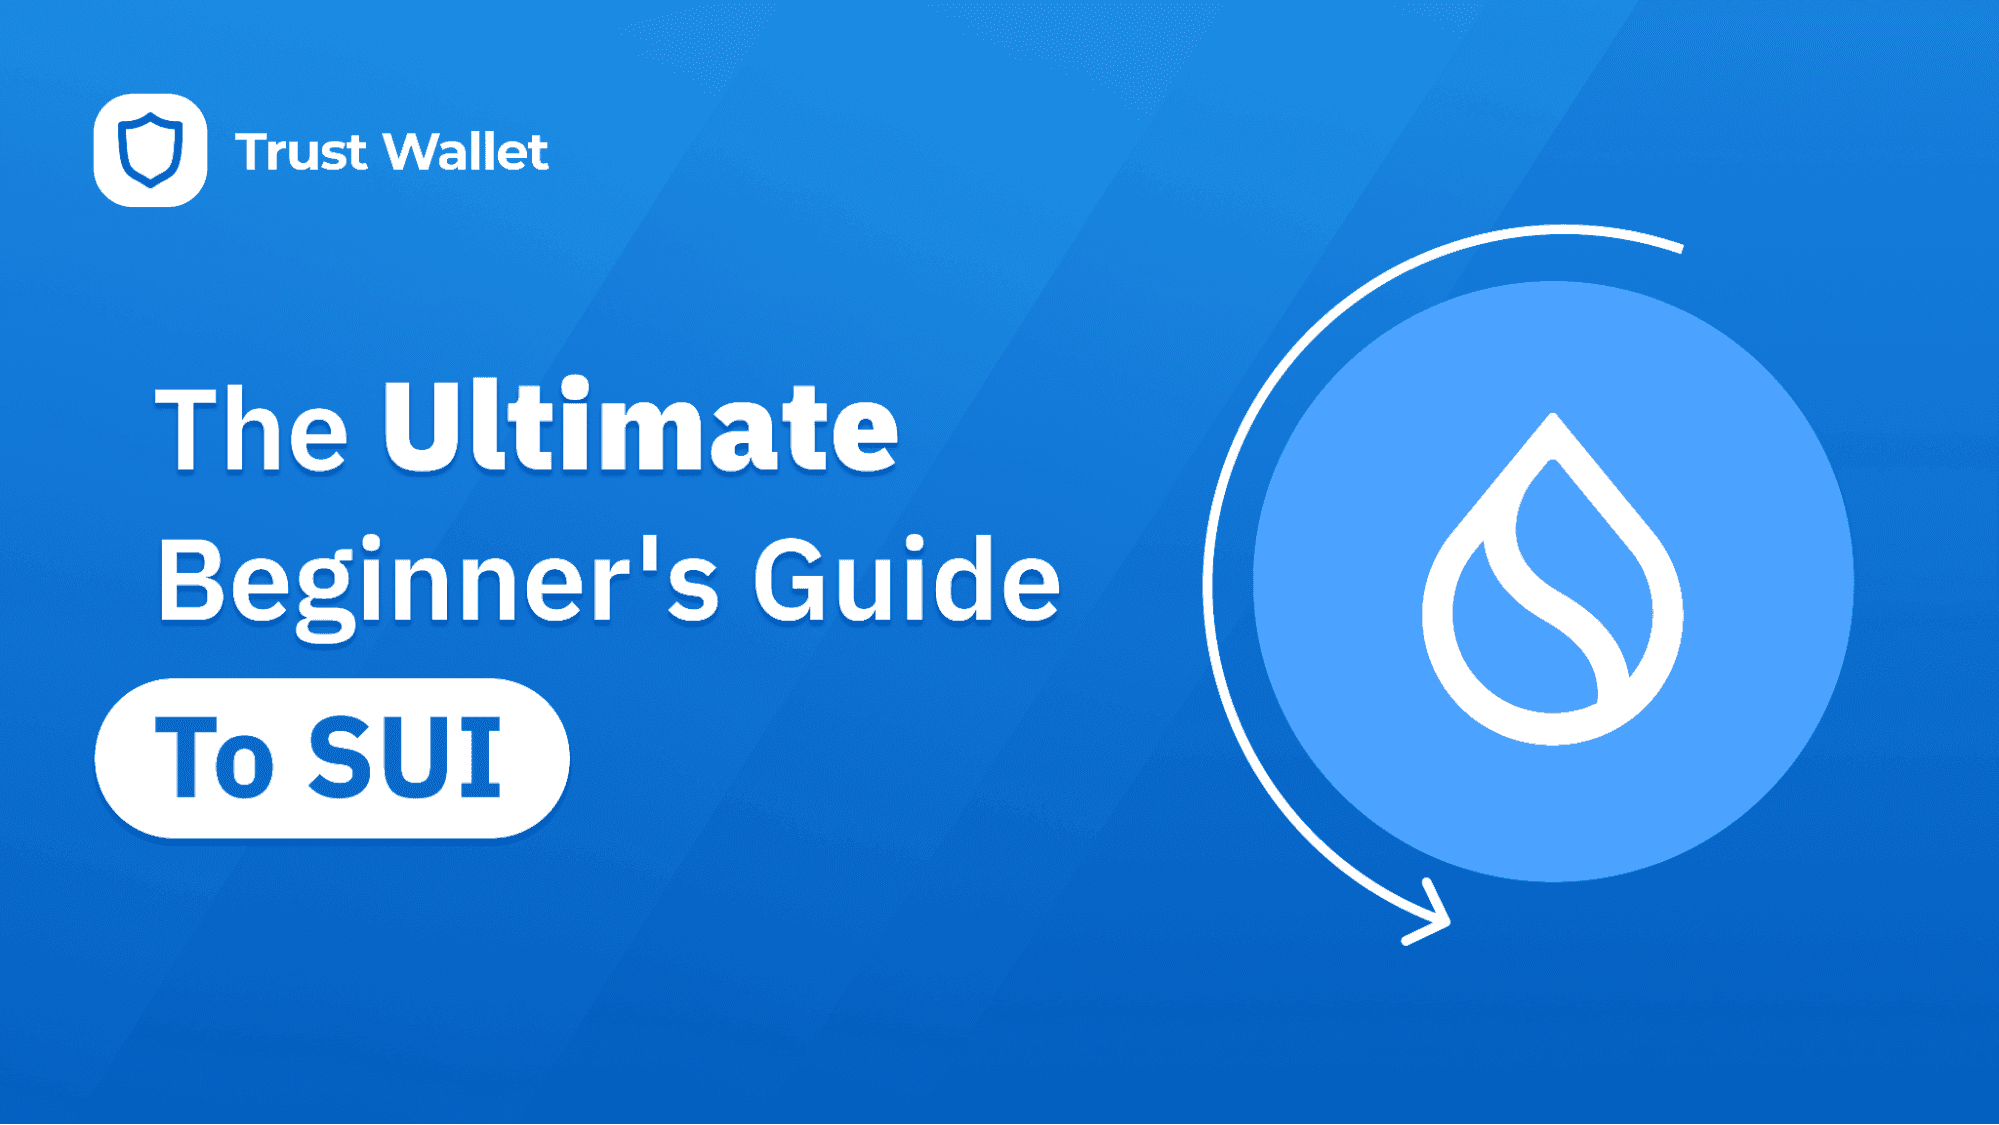 The Ultimate Beginner's Guide To SUI